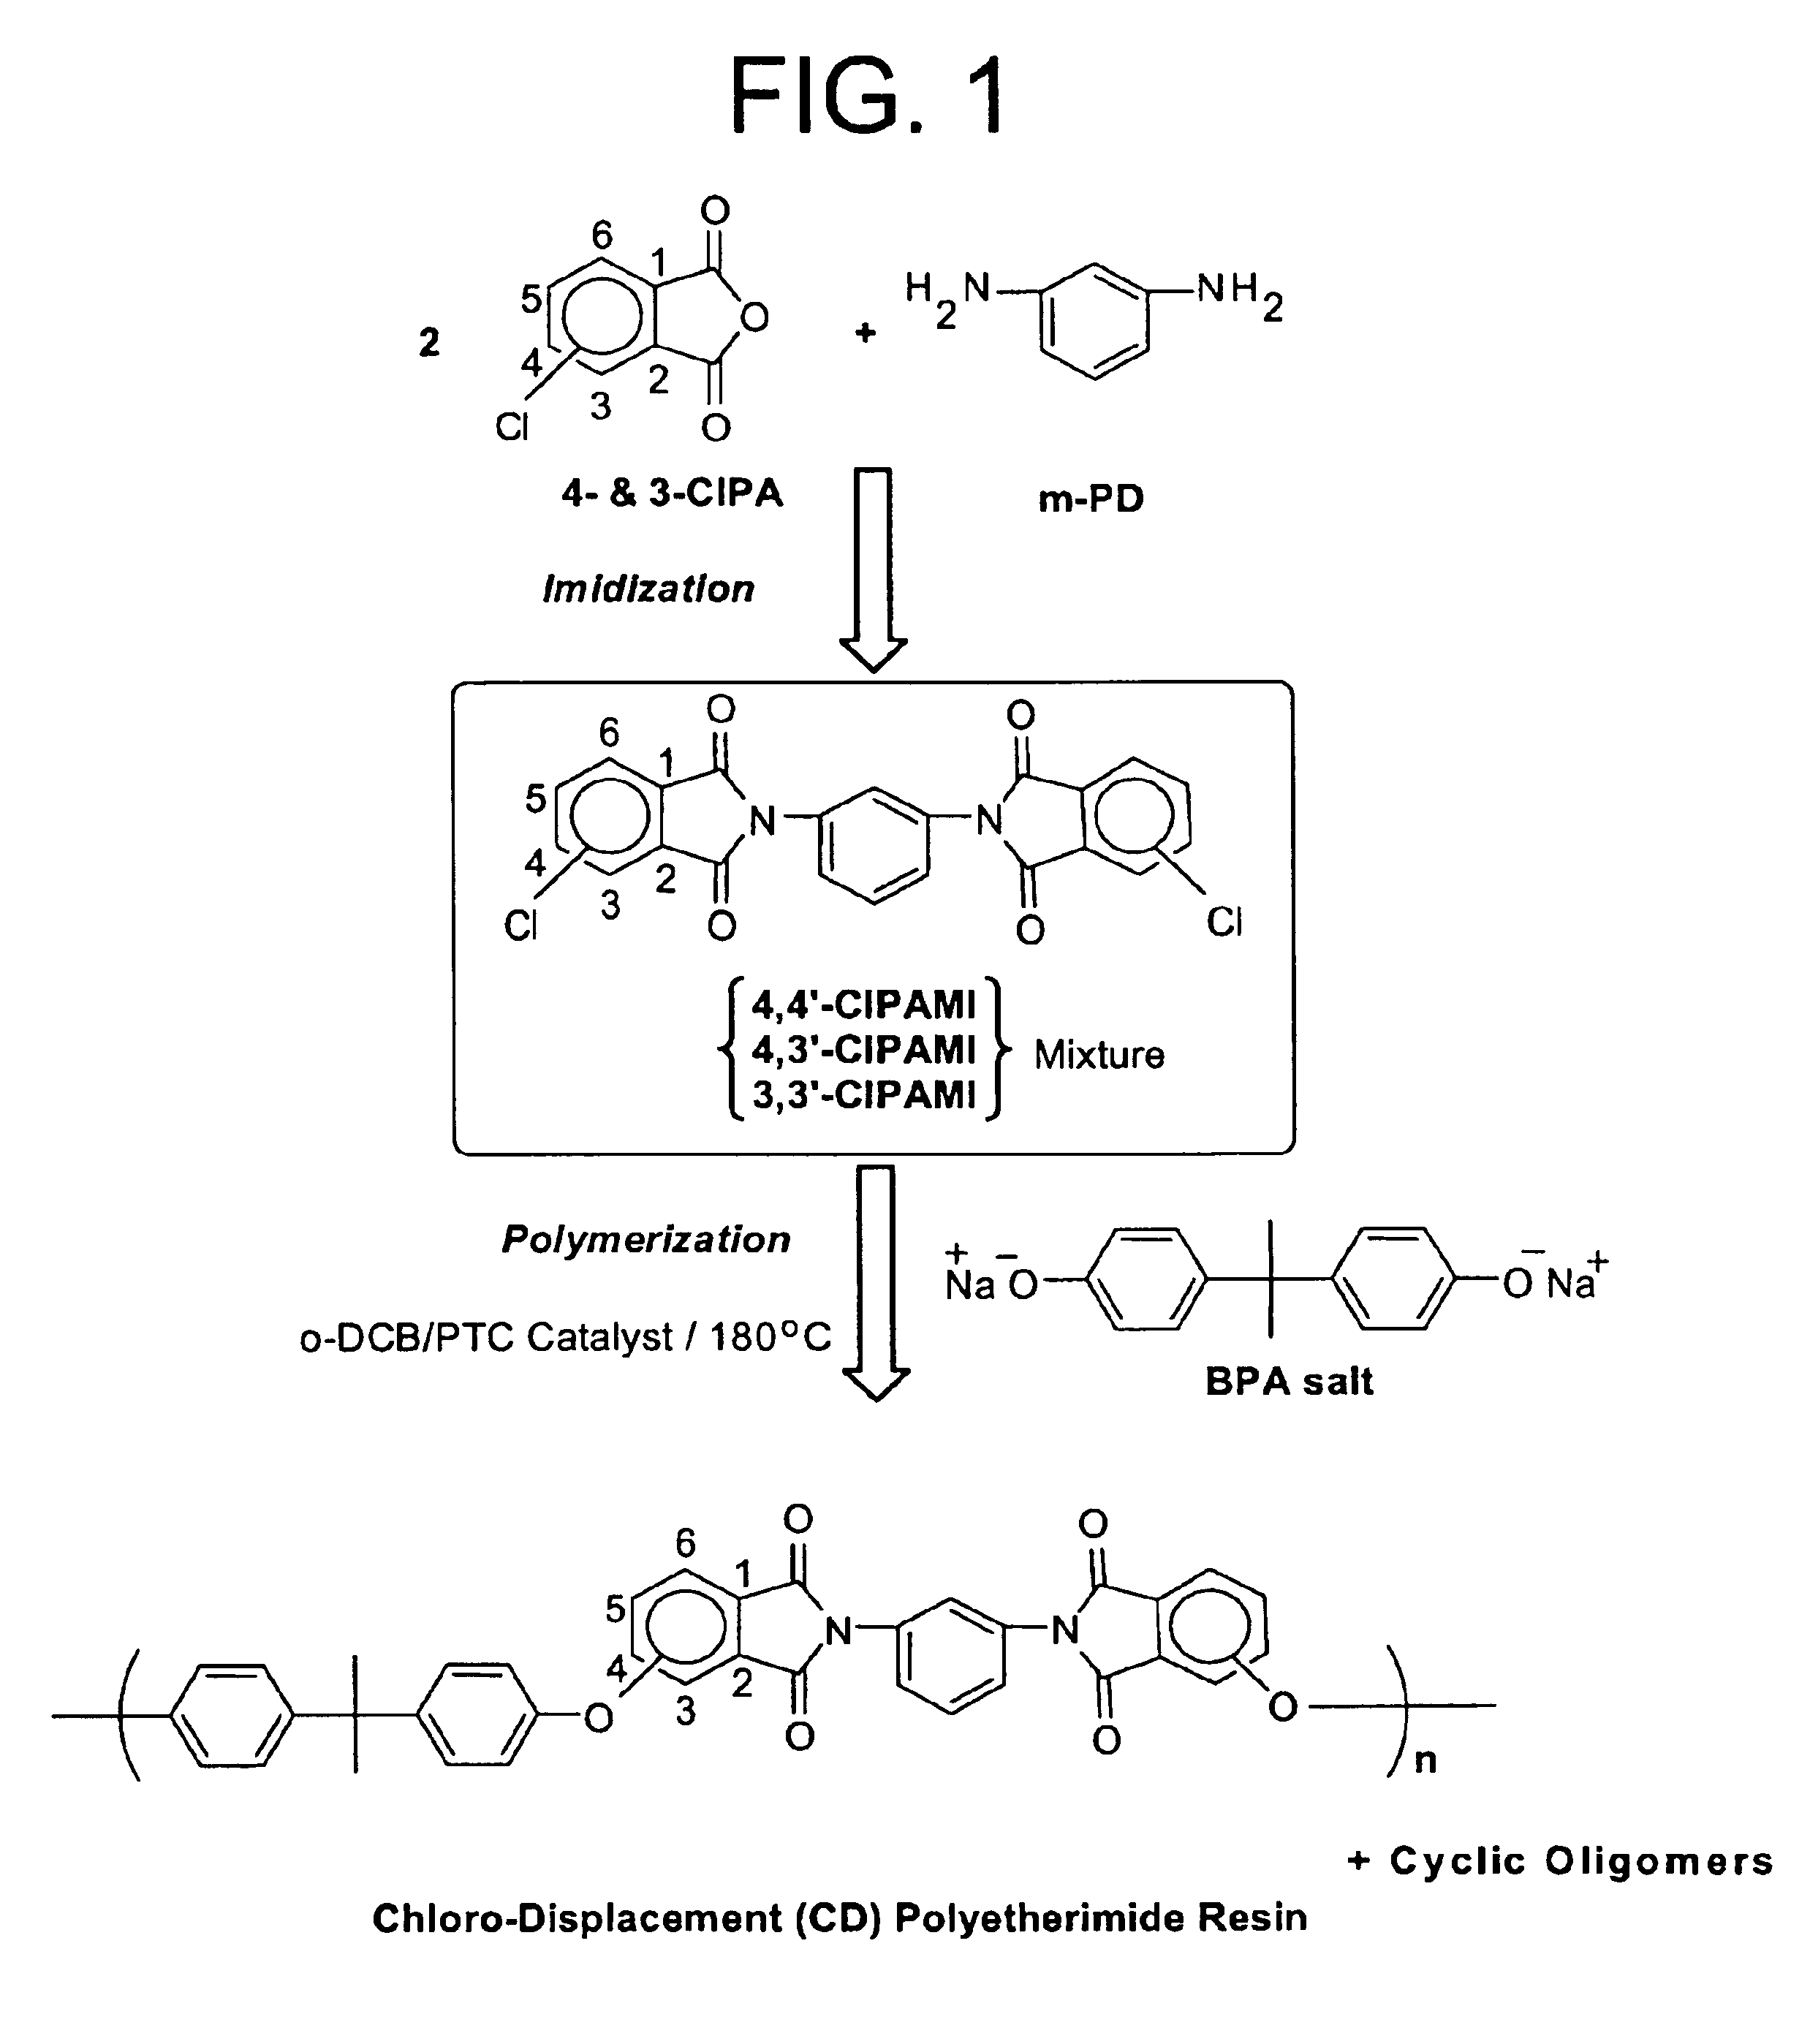 Process for fractionation/concentration to reduce the polydispersivity of polymers